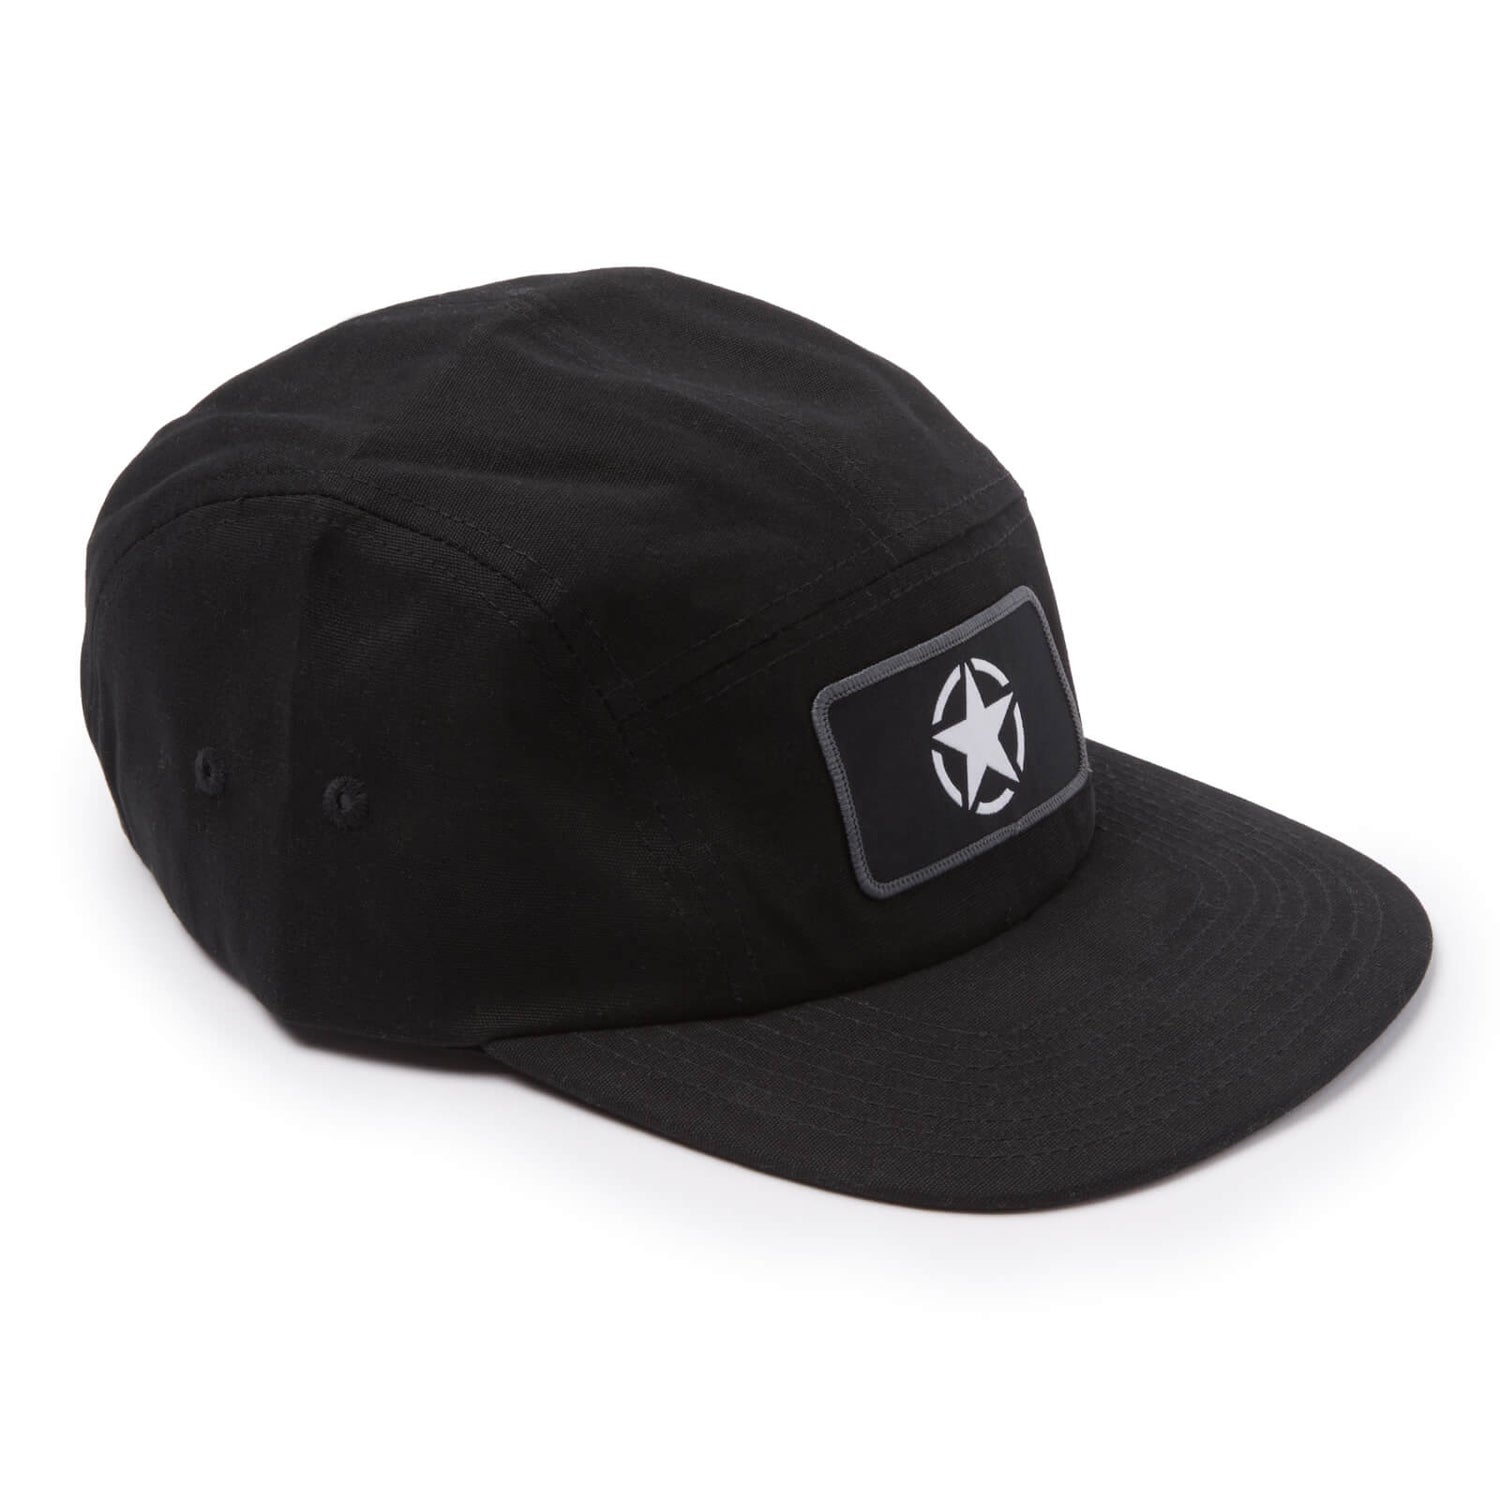 Milliner x Call of Duty Star Volley Hat - Black